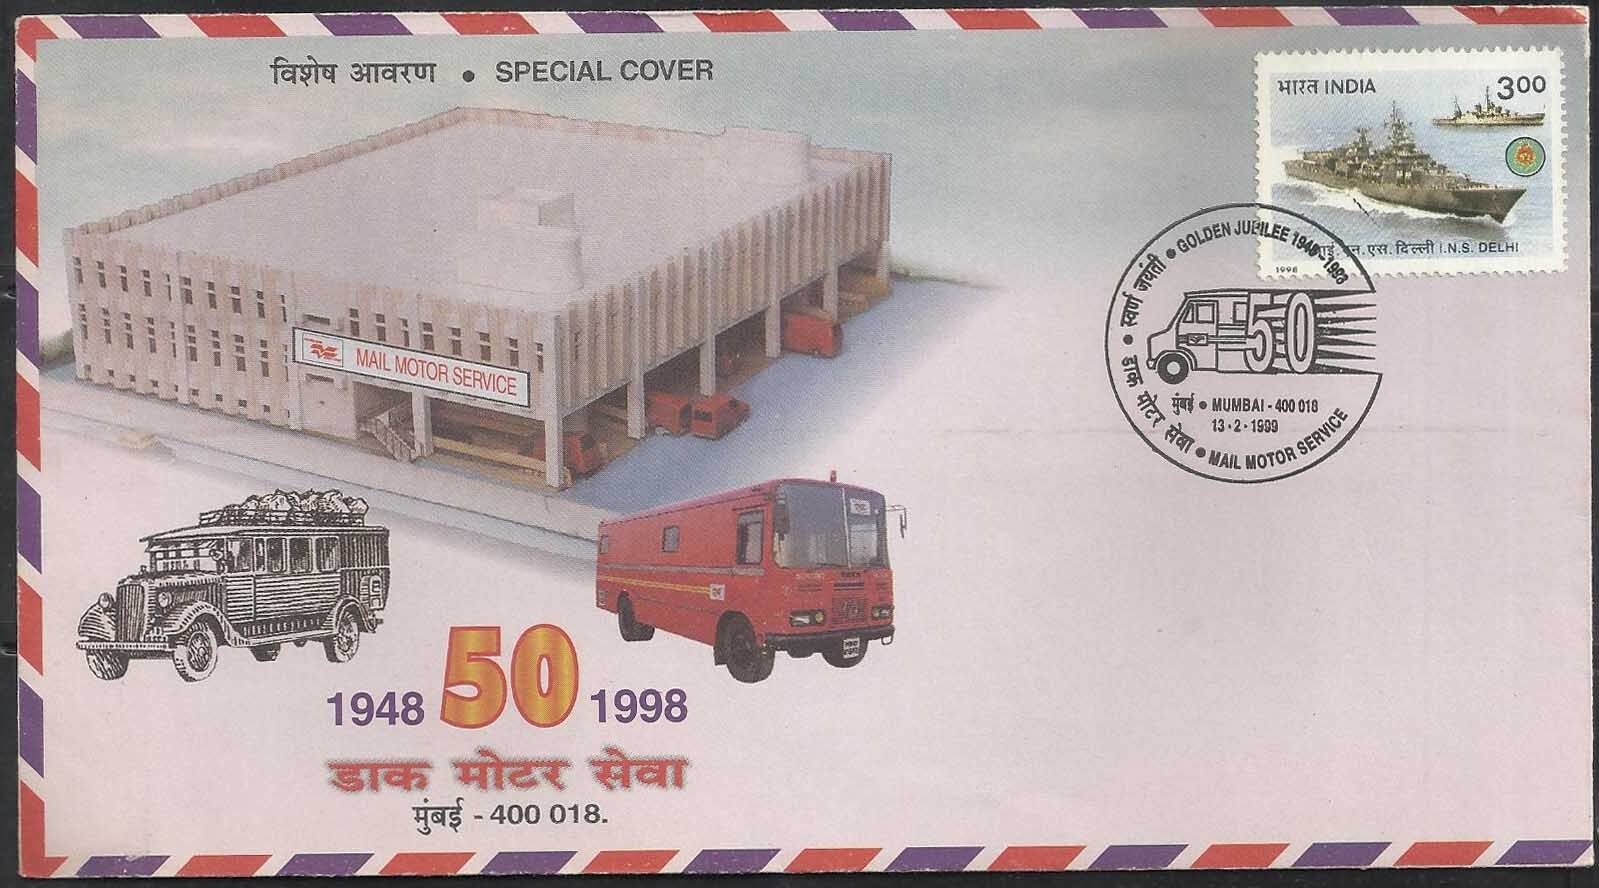 Mail Van motor vehicle Automobile Transport 1998 India special cover postal post